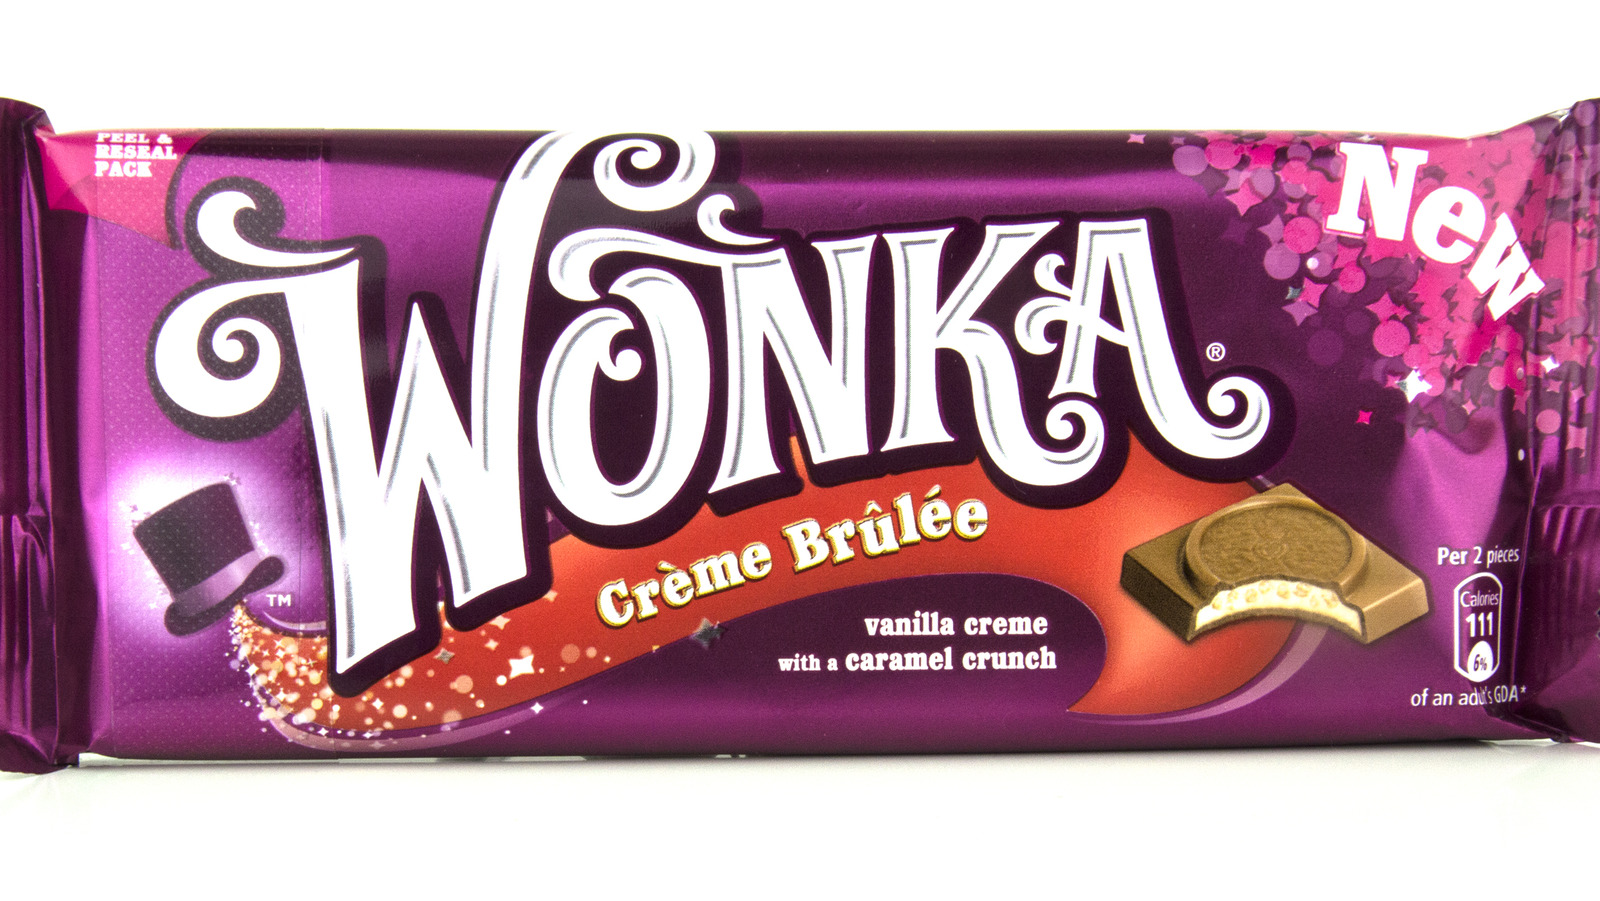 Why The UK's Counterfeit Wonka Bars Are So Concerning